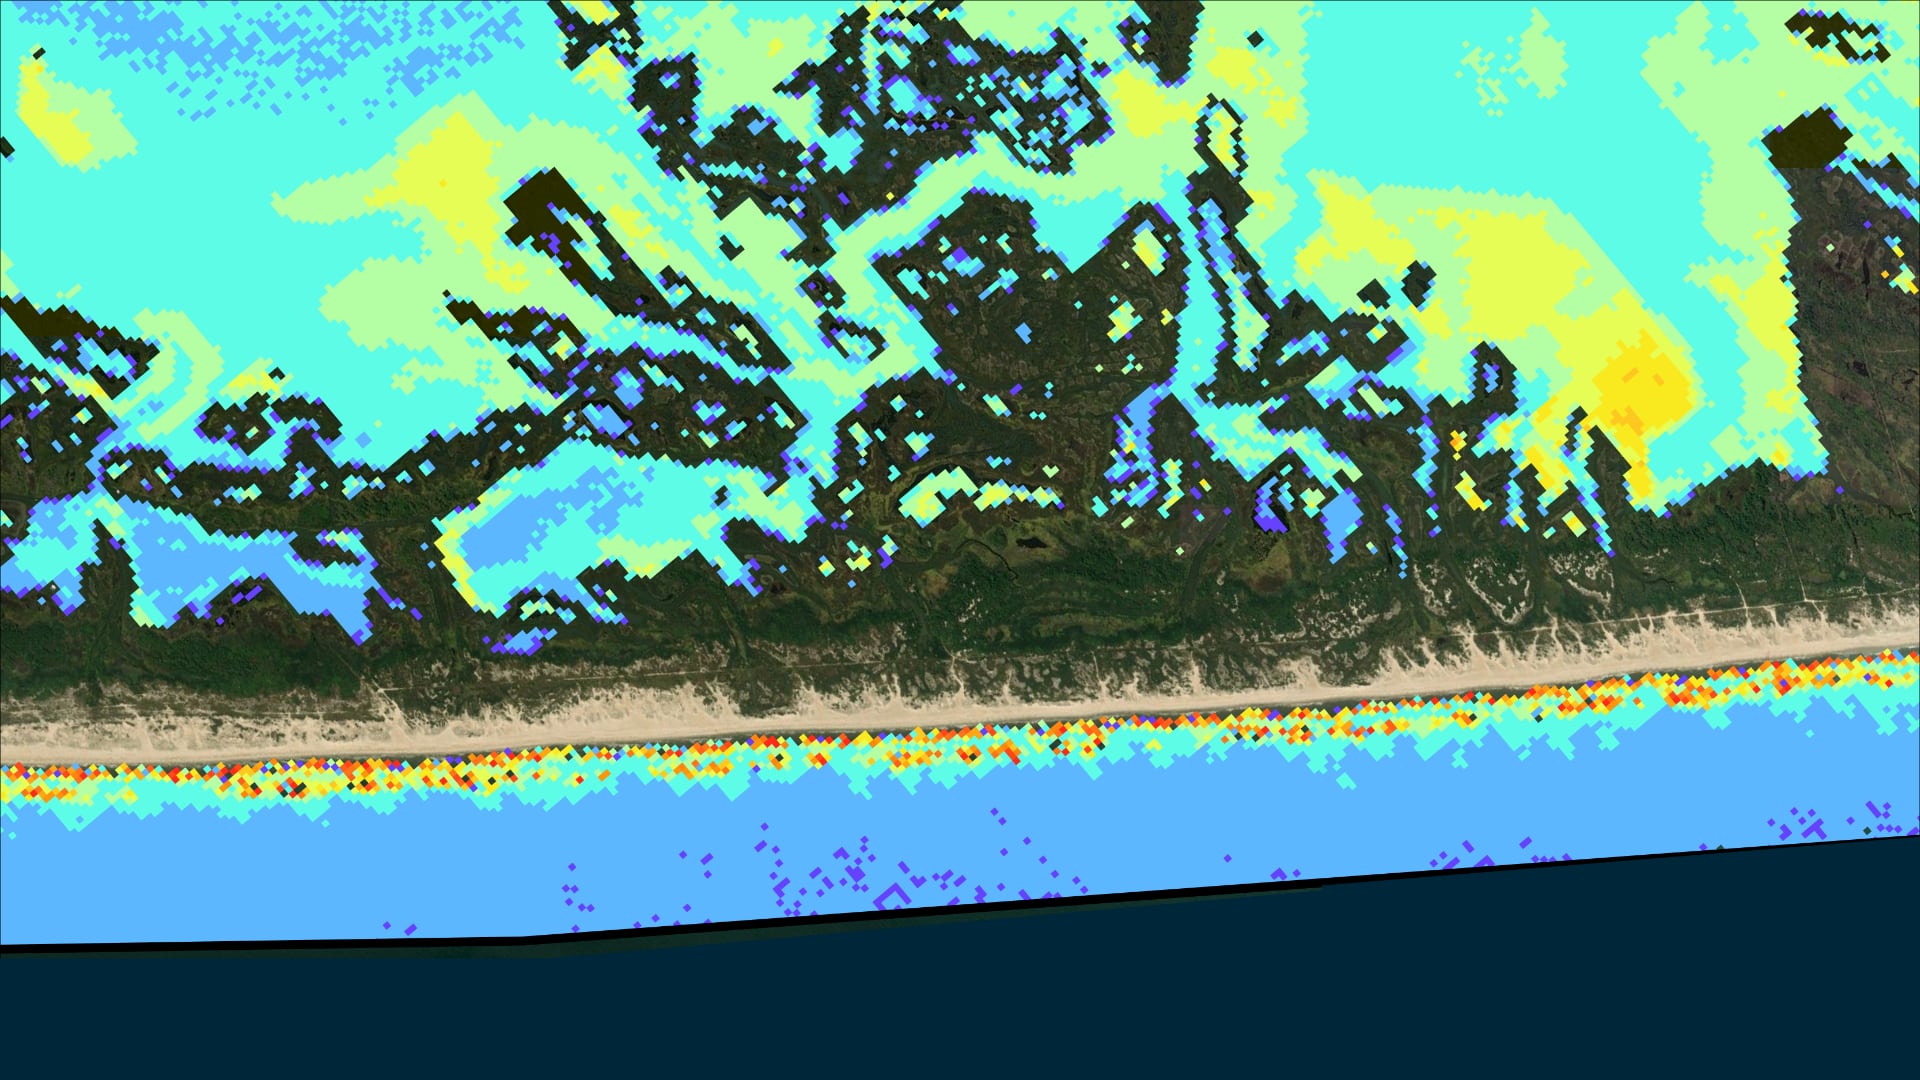 Nearshore turbidity created with 2020 Landsat 8 OLI red band (B3). Assateague Island, our study site, is located off the coast of Virginia and Maryland. Red shades suggest high turbidity, light green and yellow shades suggest moderate turbidity and blue and purple shades show low turbidity. Knowing the extent of turbidity allows the team to examine how natural longshore currents are moving sediment deposited by the US Army Corps of Engineers. This is important for both the geological integrity of the island and threatened species depend on sediment replenishment.  Keywords: Turbidity, ORCAA, ocean color, bathymetry, sediment transport